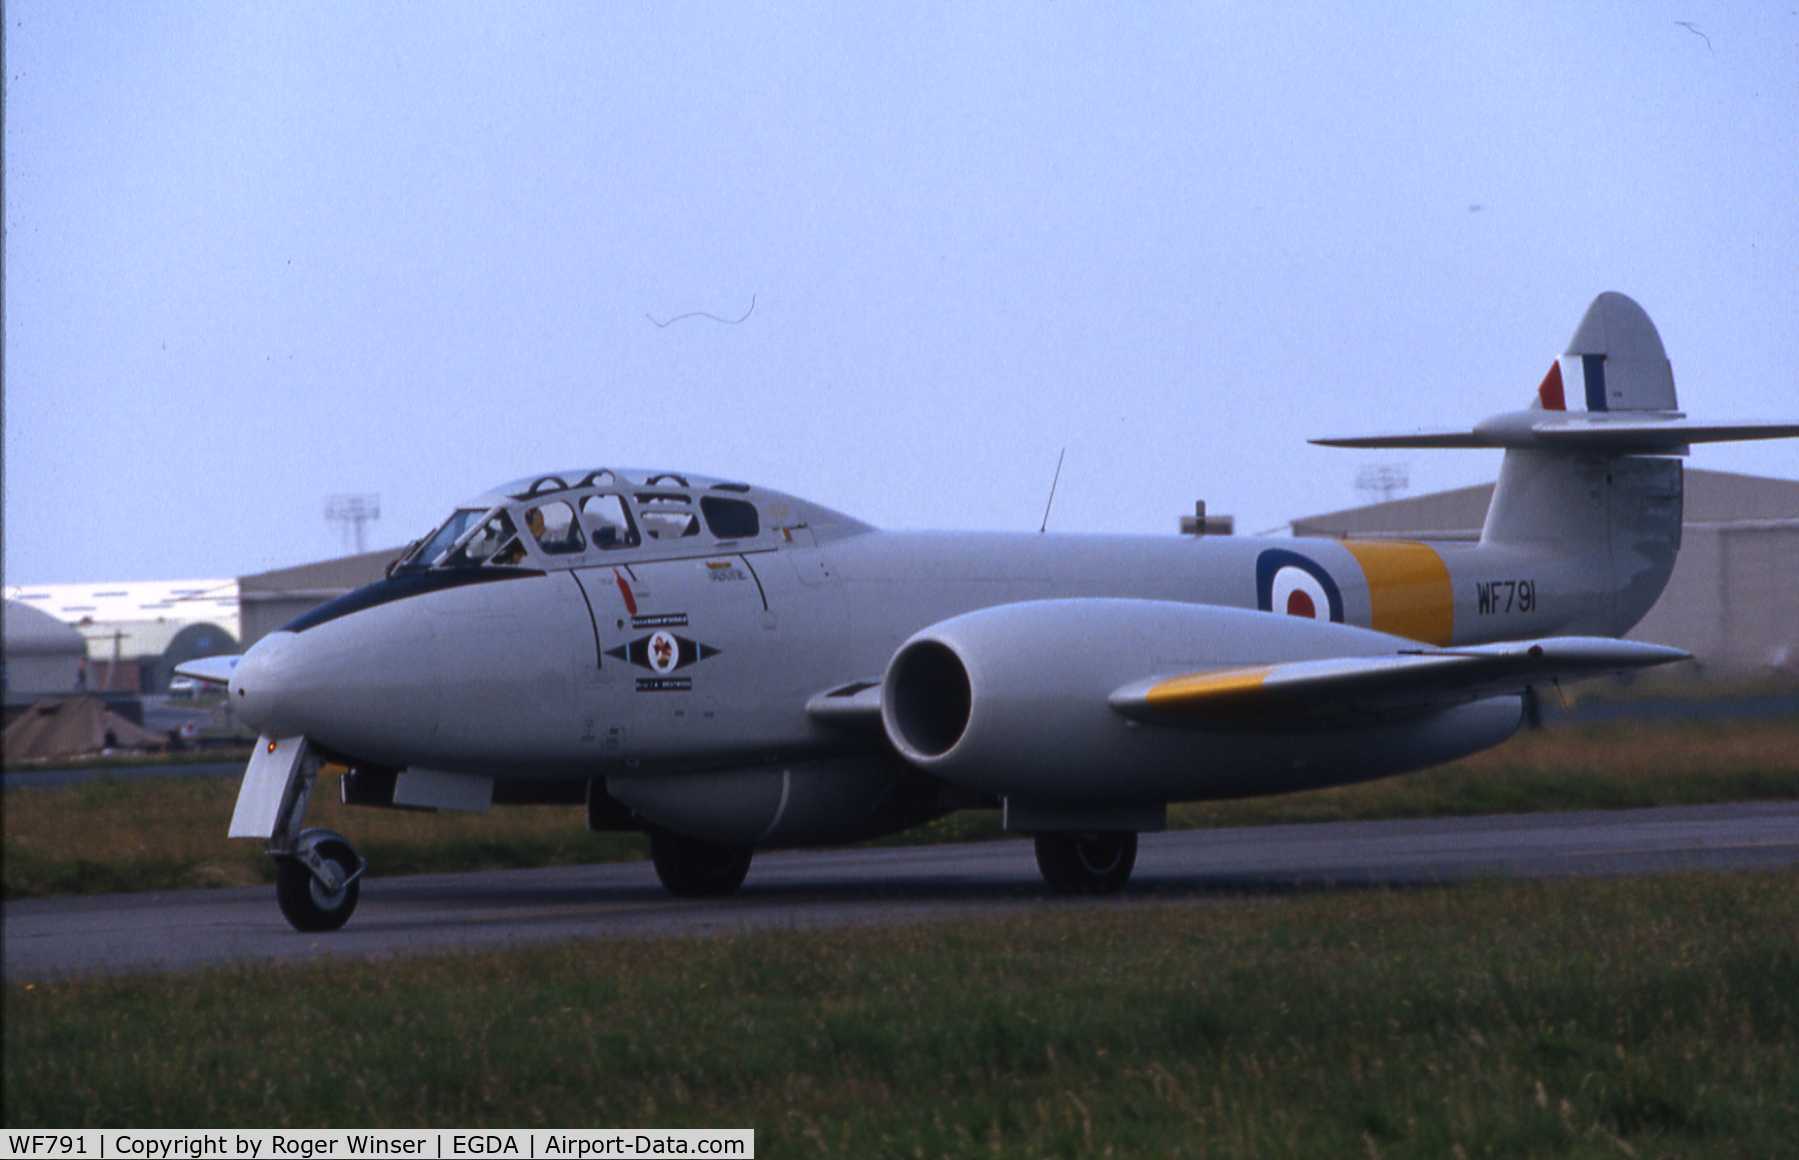 WF791, 1951 Gloster Meteor T.7 C/N 15658, Meteor of the RAF's Vintage Pair at a RAF Brawdy Air Show, Wales, UK in the early 1980's. 